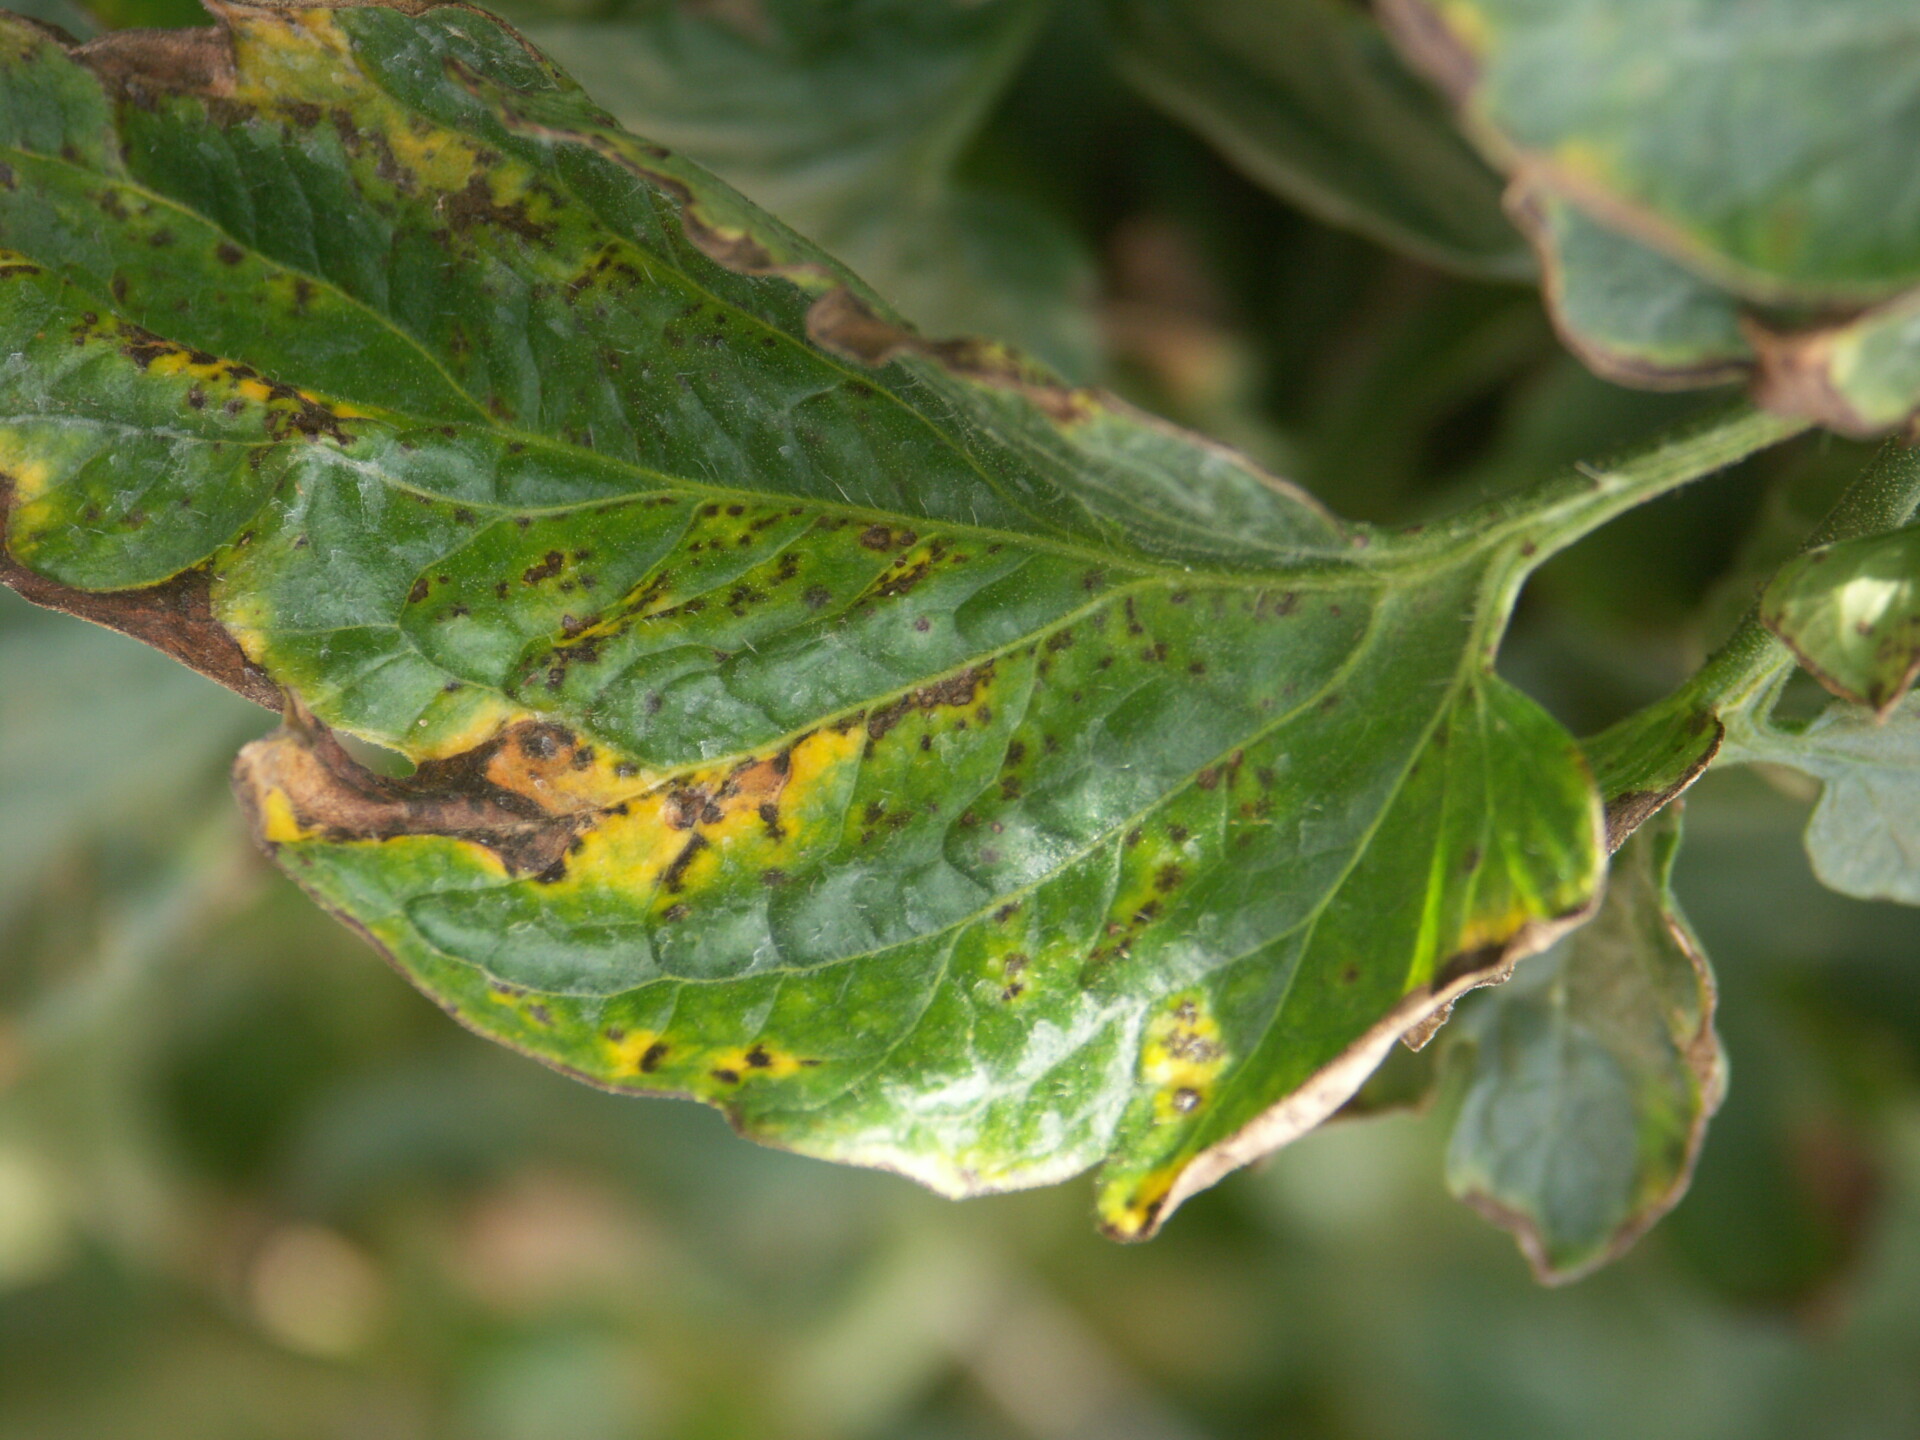  Lesions of bacterial spot on tomato leaf.